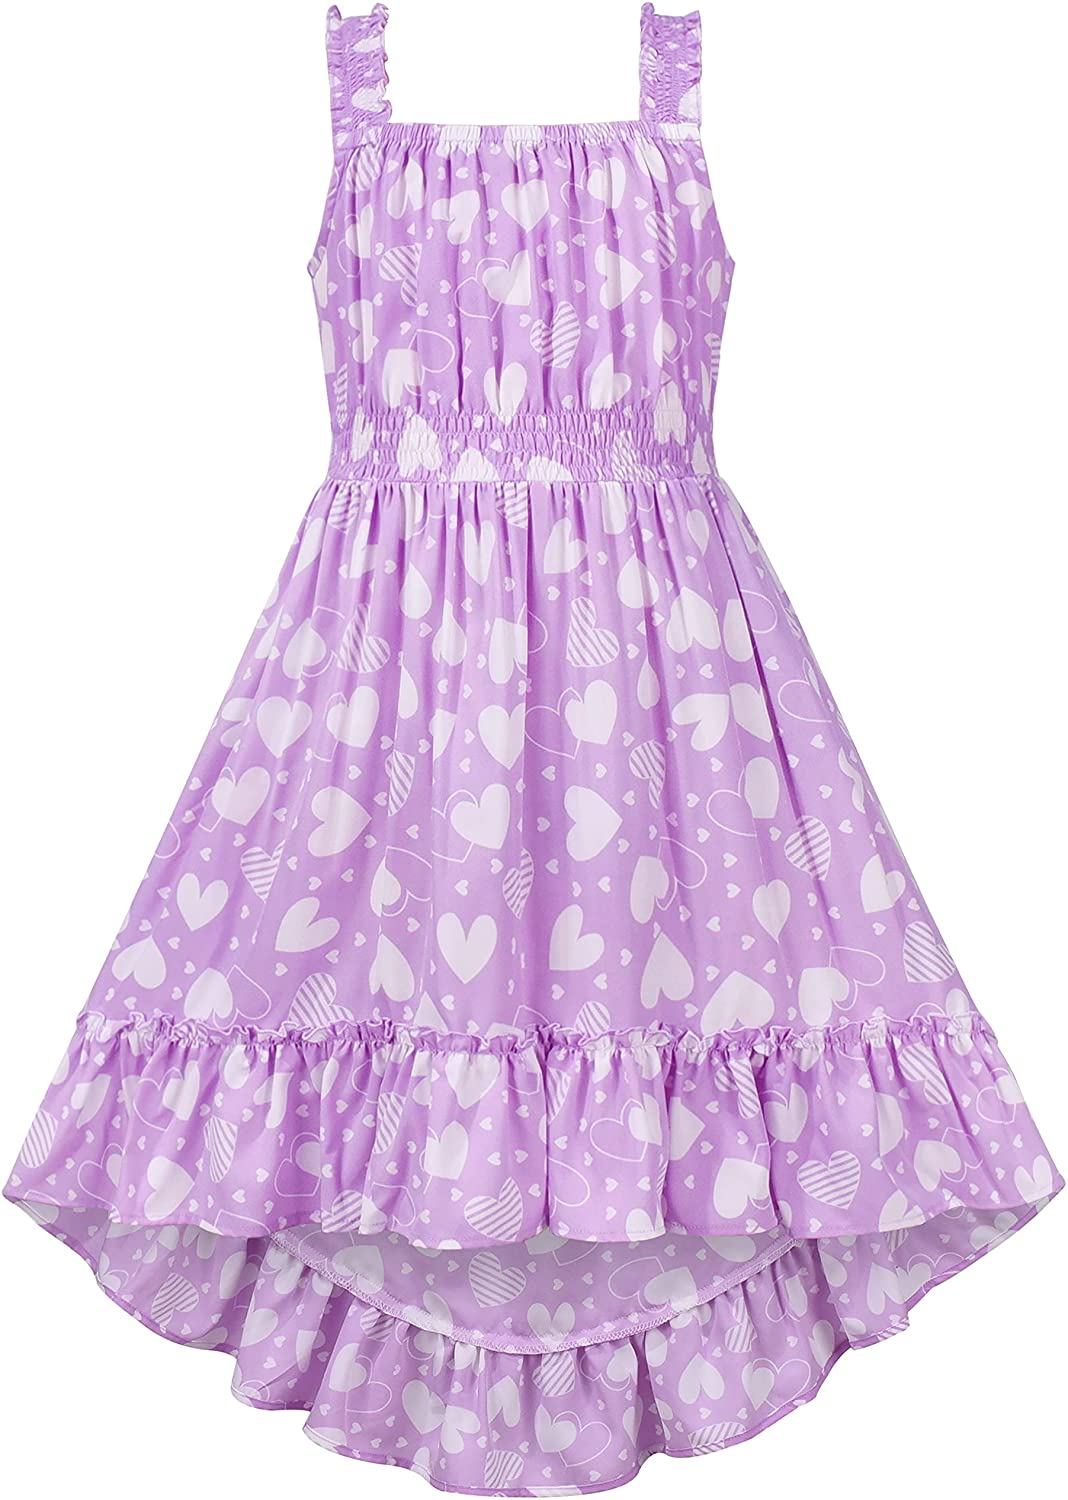 Girls' Purple Hi-Low Summer Party Dress Size 6-12, Comfortable Polyester Material